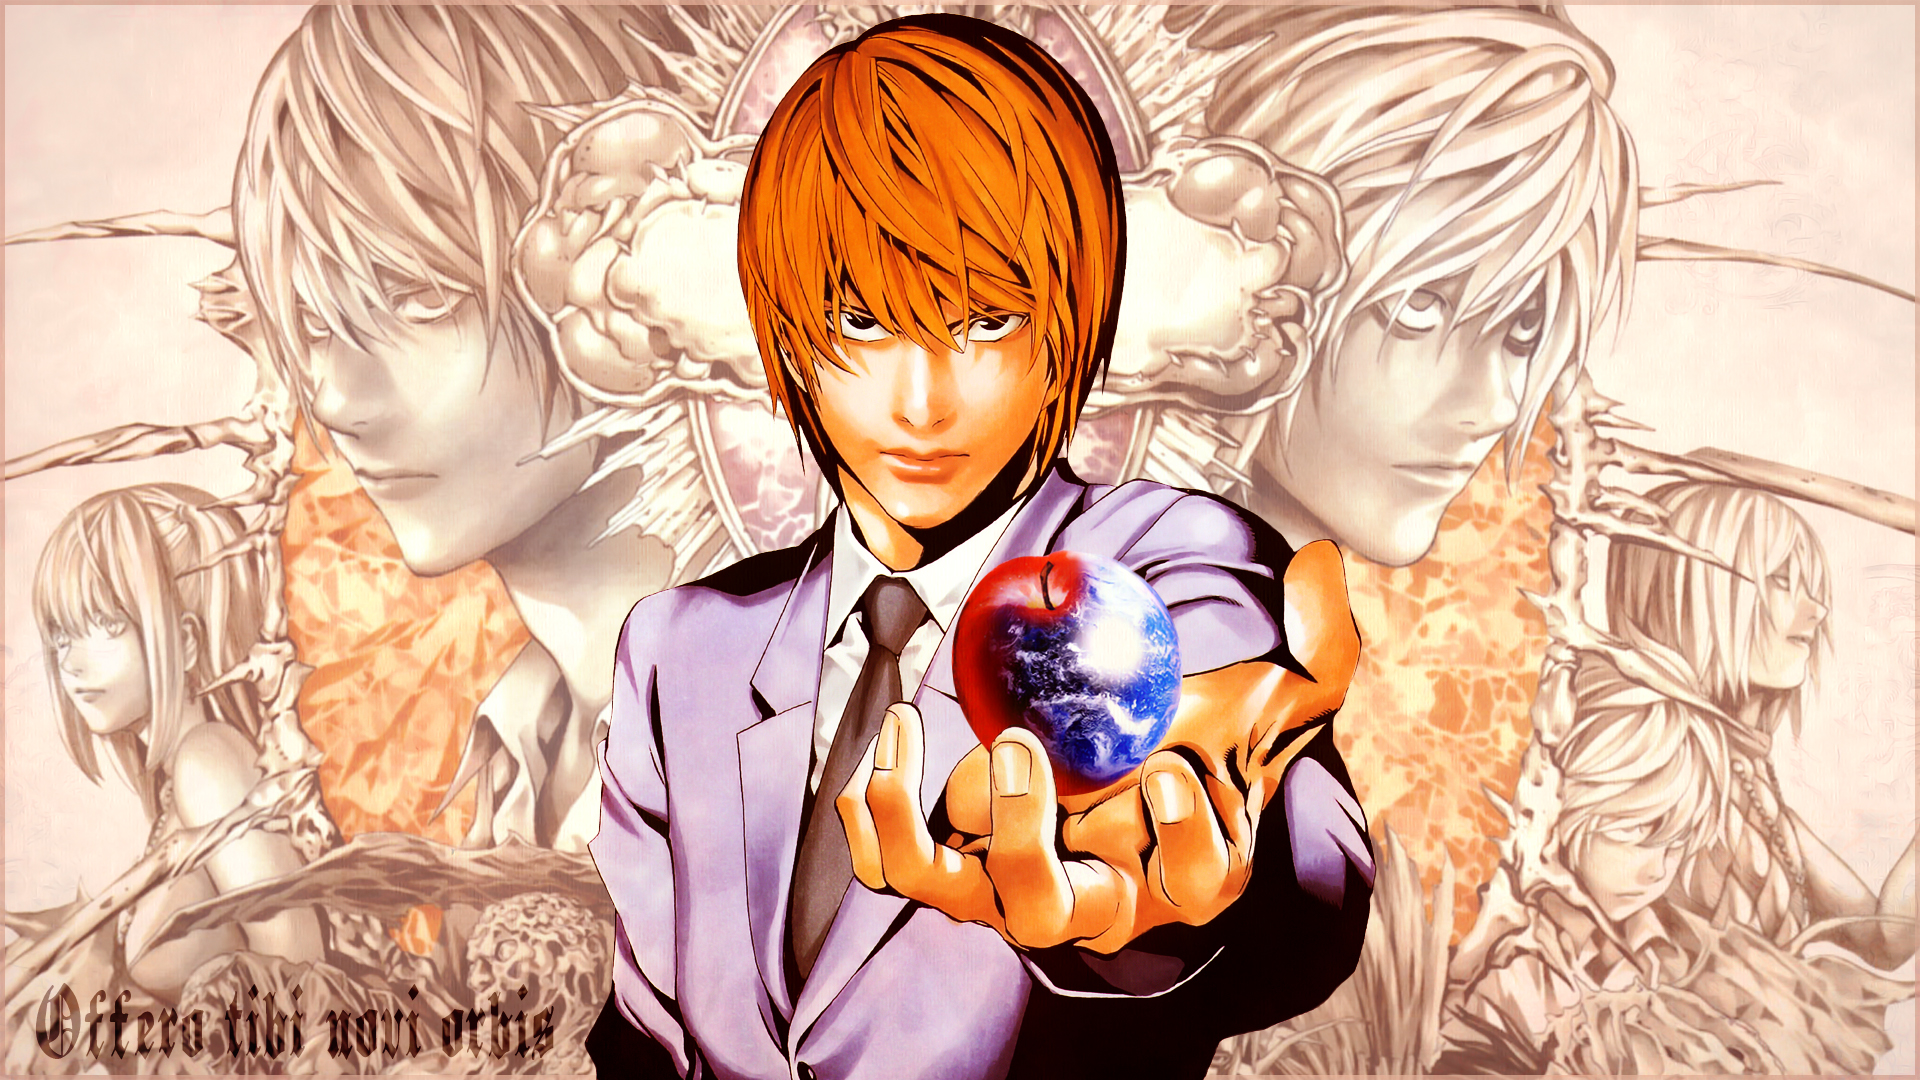 Anime Death Note HD Wallpaper by Dr-Erich